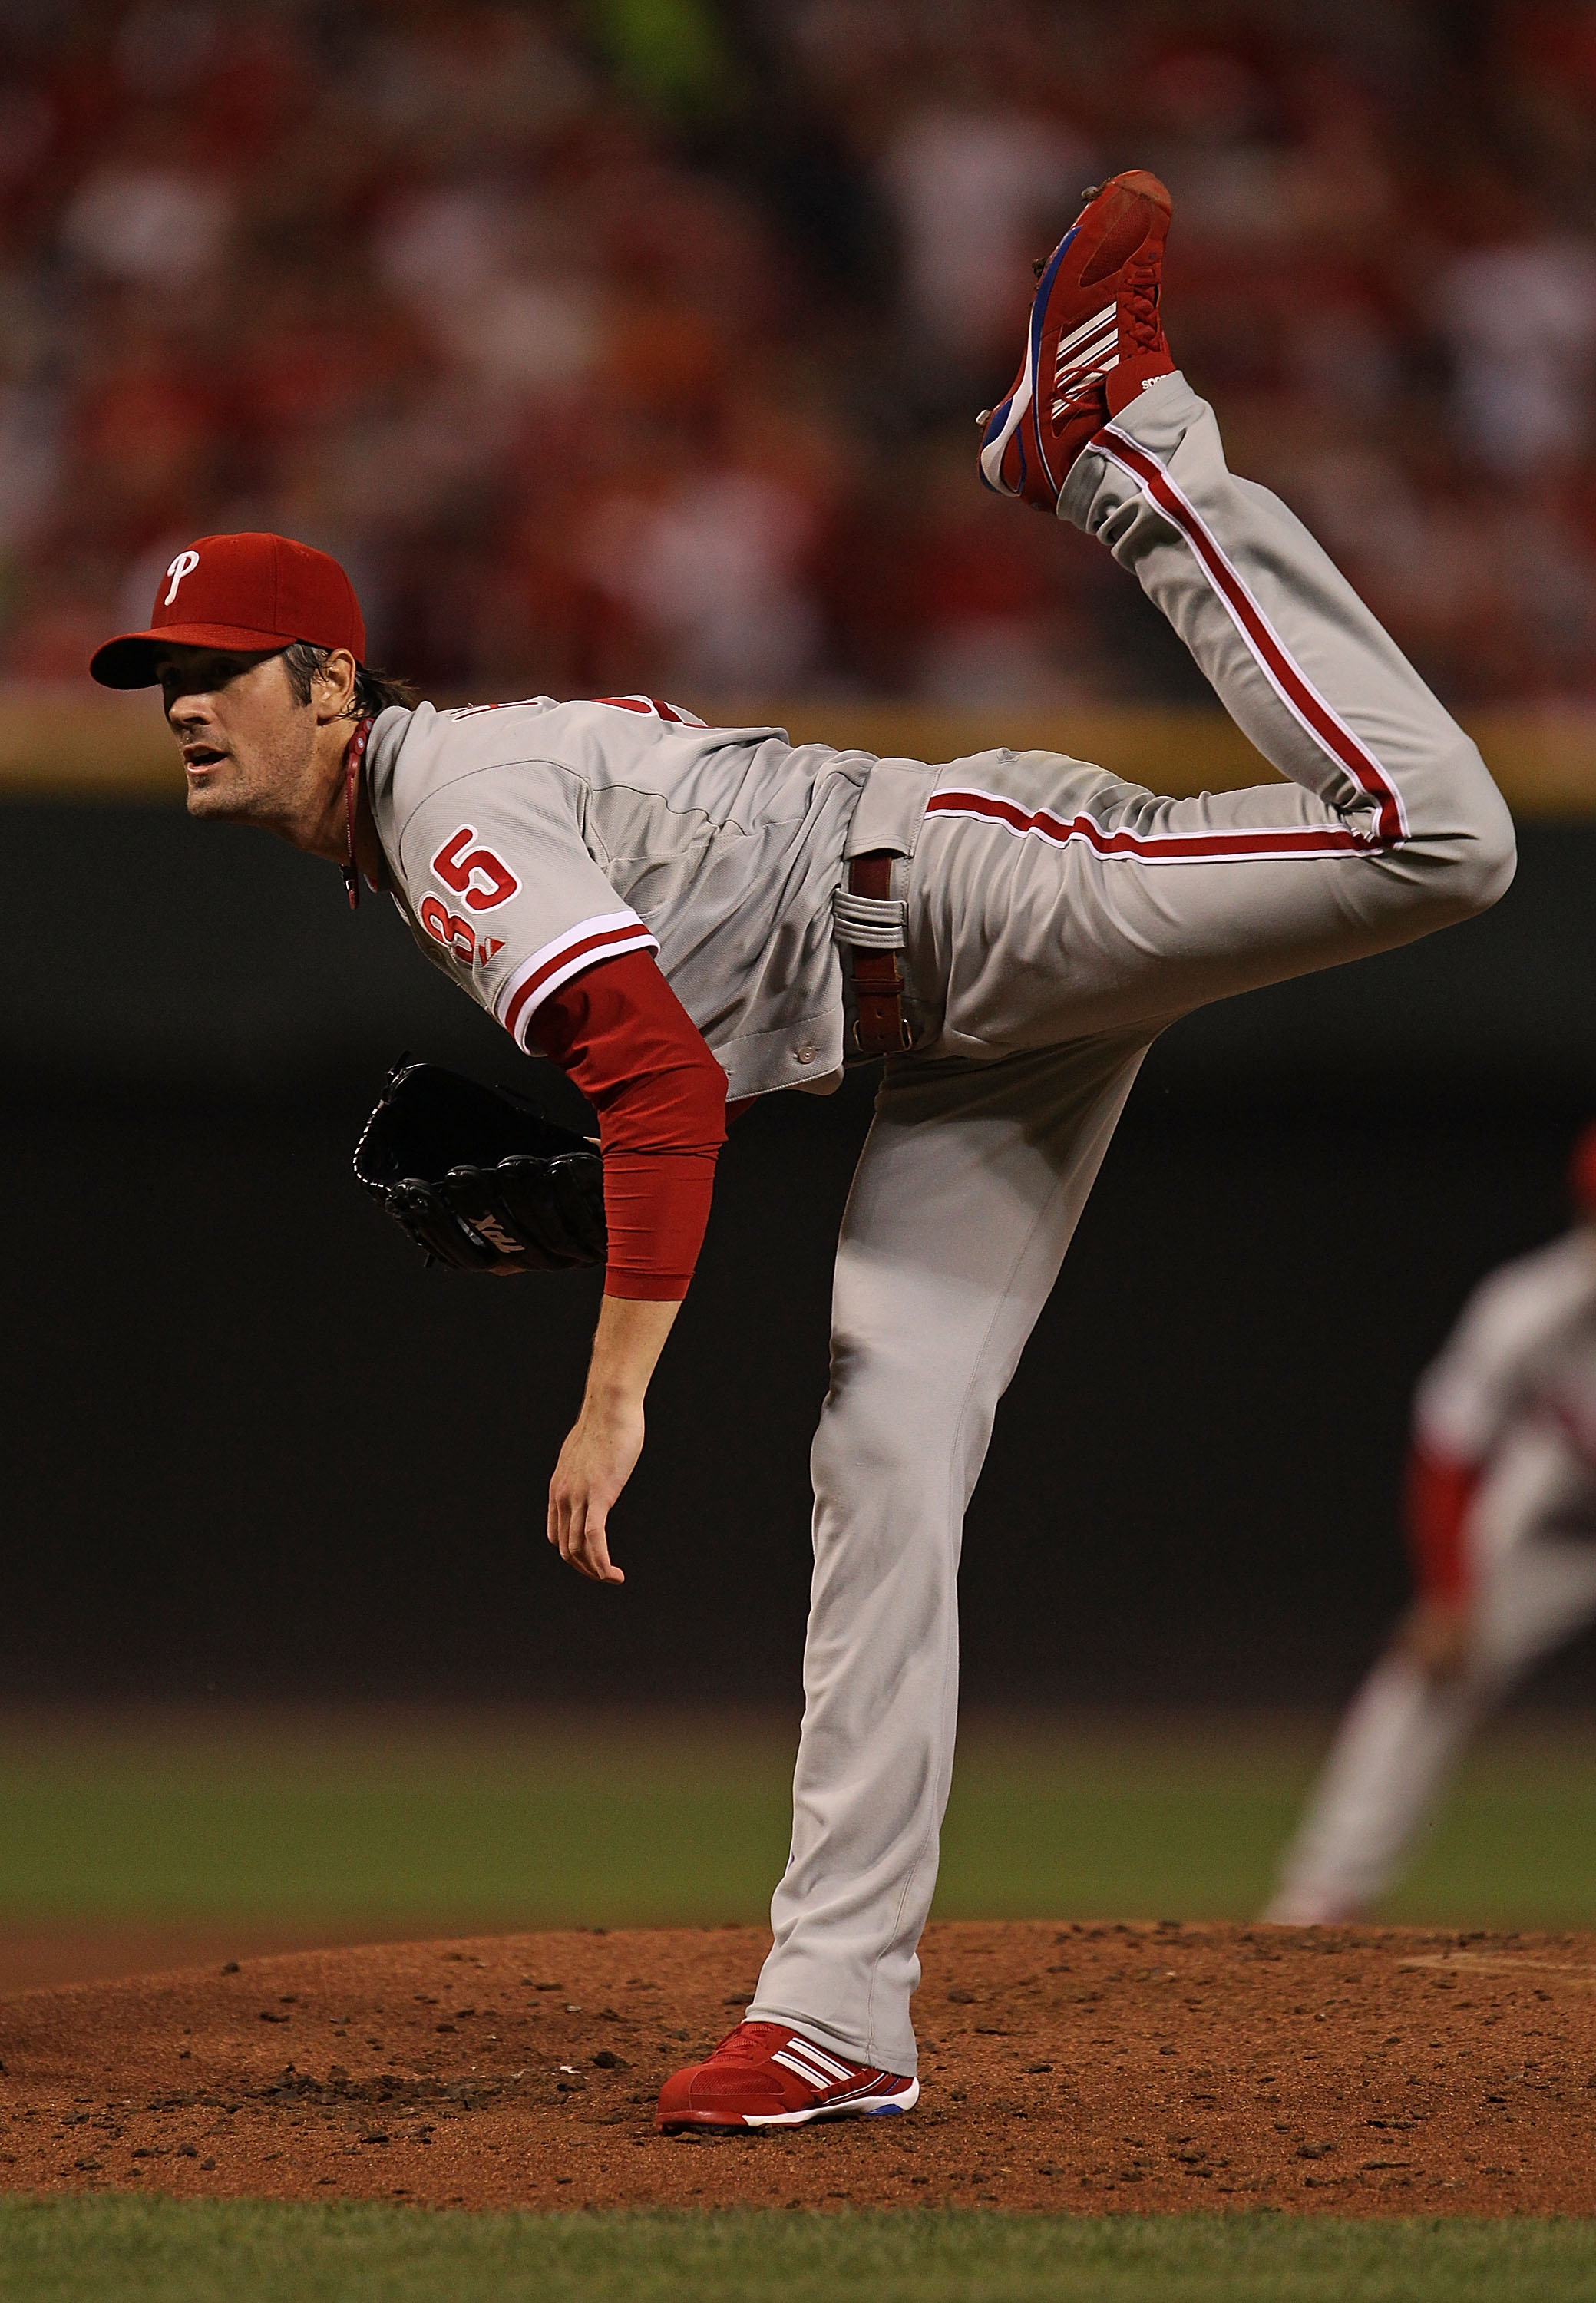 CINCINNATI - OCTOBER 10: Cole Hamels #35 of the Philadelphia Phillies delivers the ball against the Cincinnati Reds on his way to a complete game shut-out during game 3 of the NLDS at Great American Ball Park on October 10, 2010 in Cincinnati, Ohio. The P